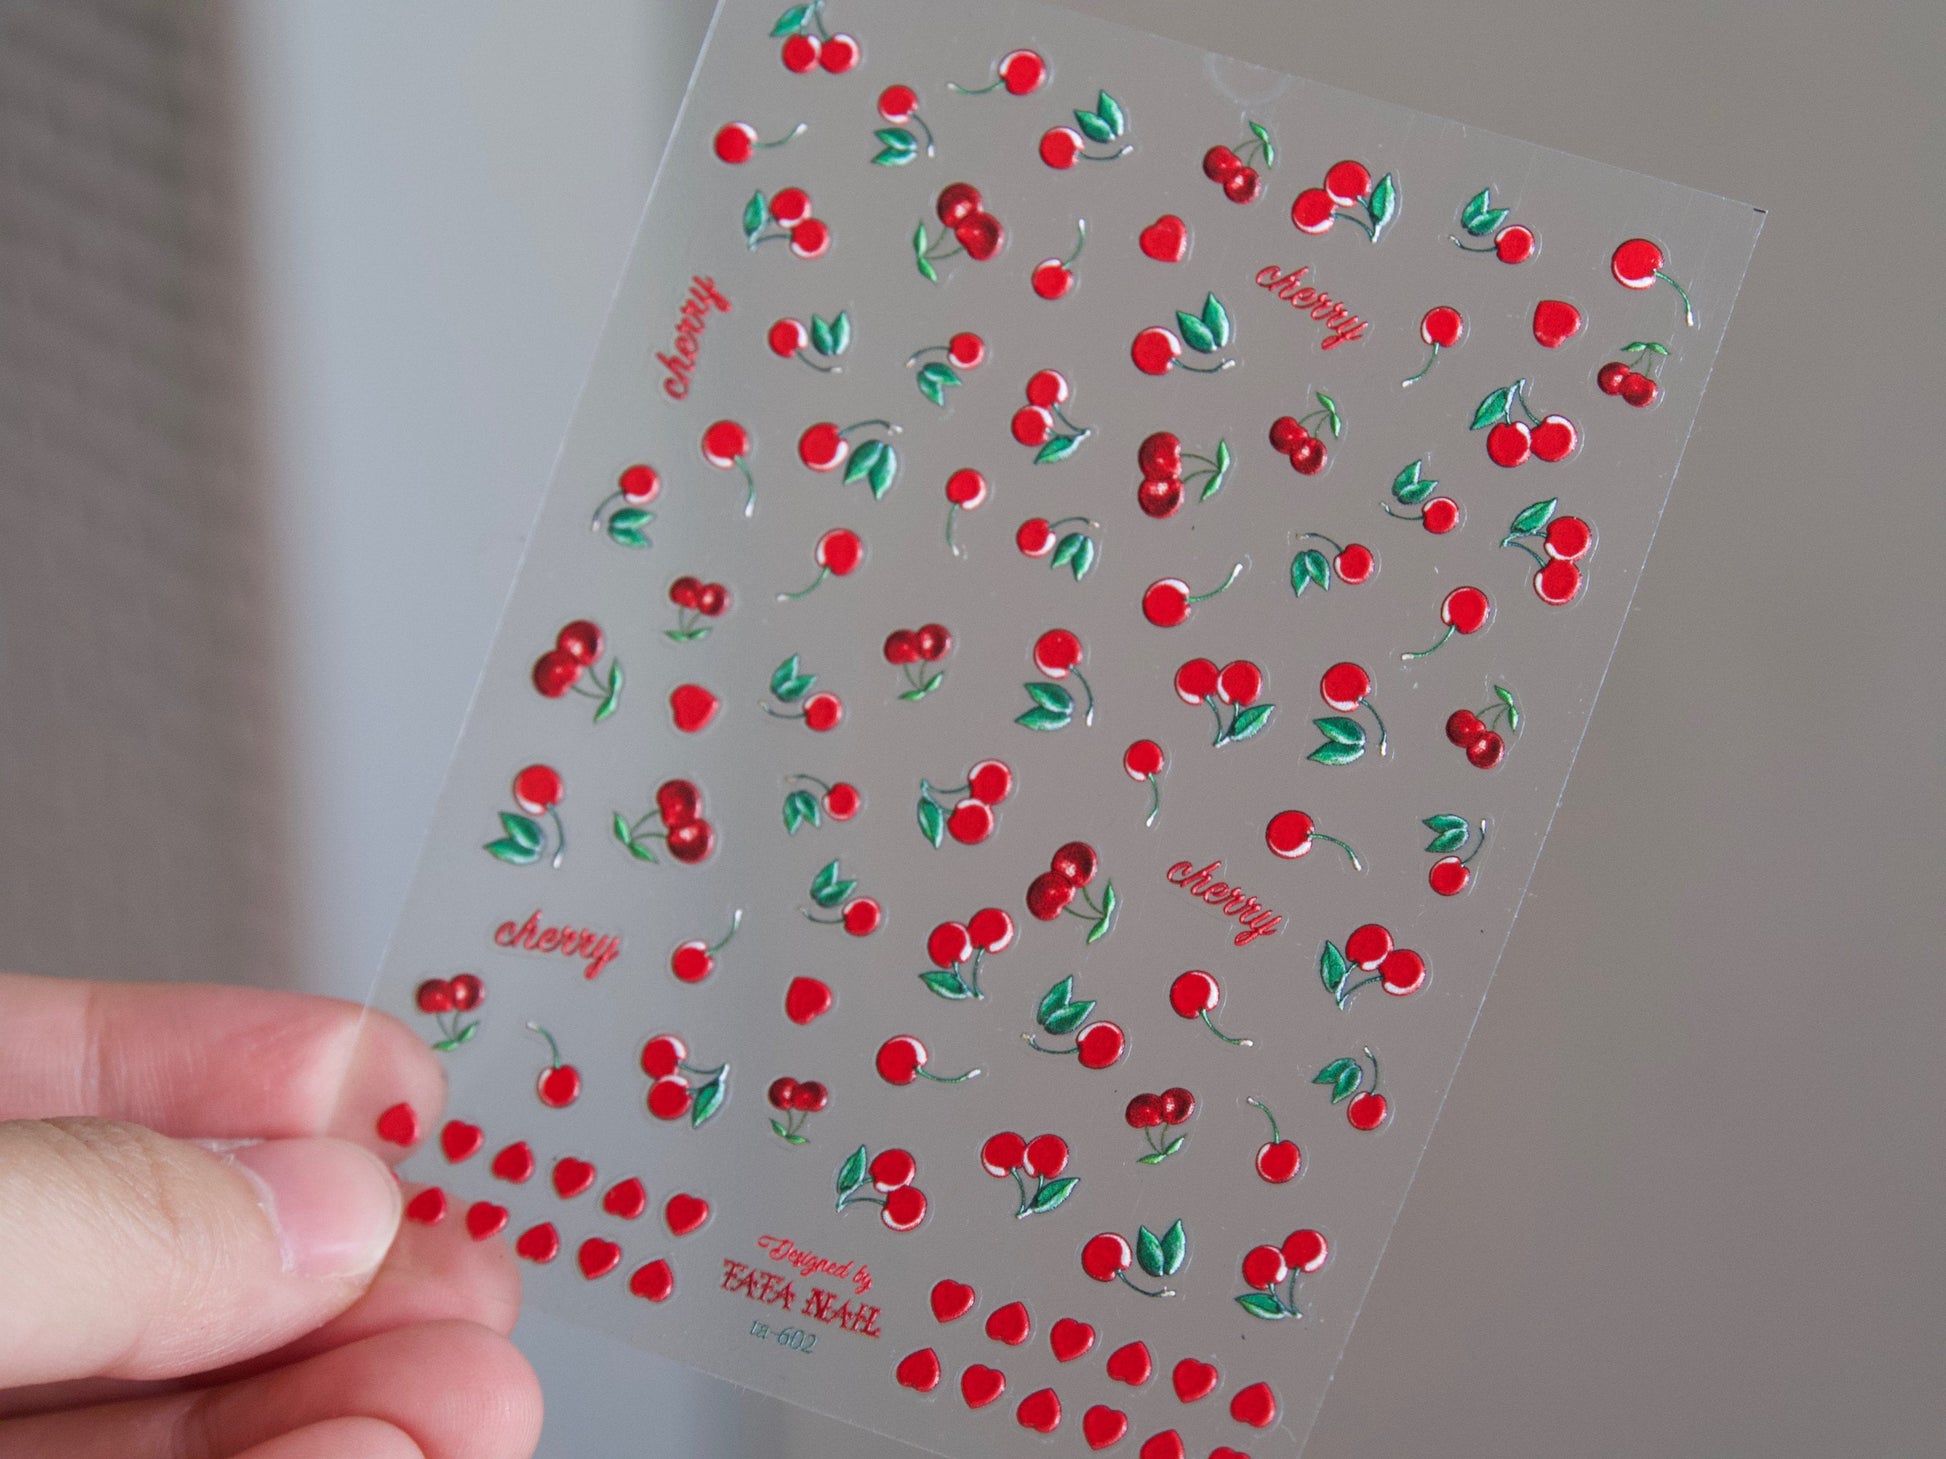 Cherry Fruity Nail Art Sticker/ 3D fruits DIY Tips Guides peel off  Stickers/Red Cherries Yellow Banana fruit nail decal